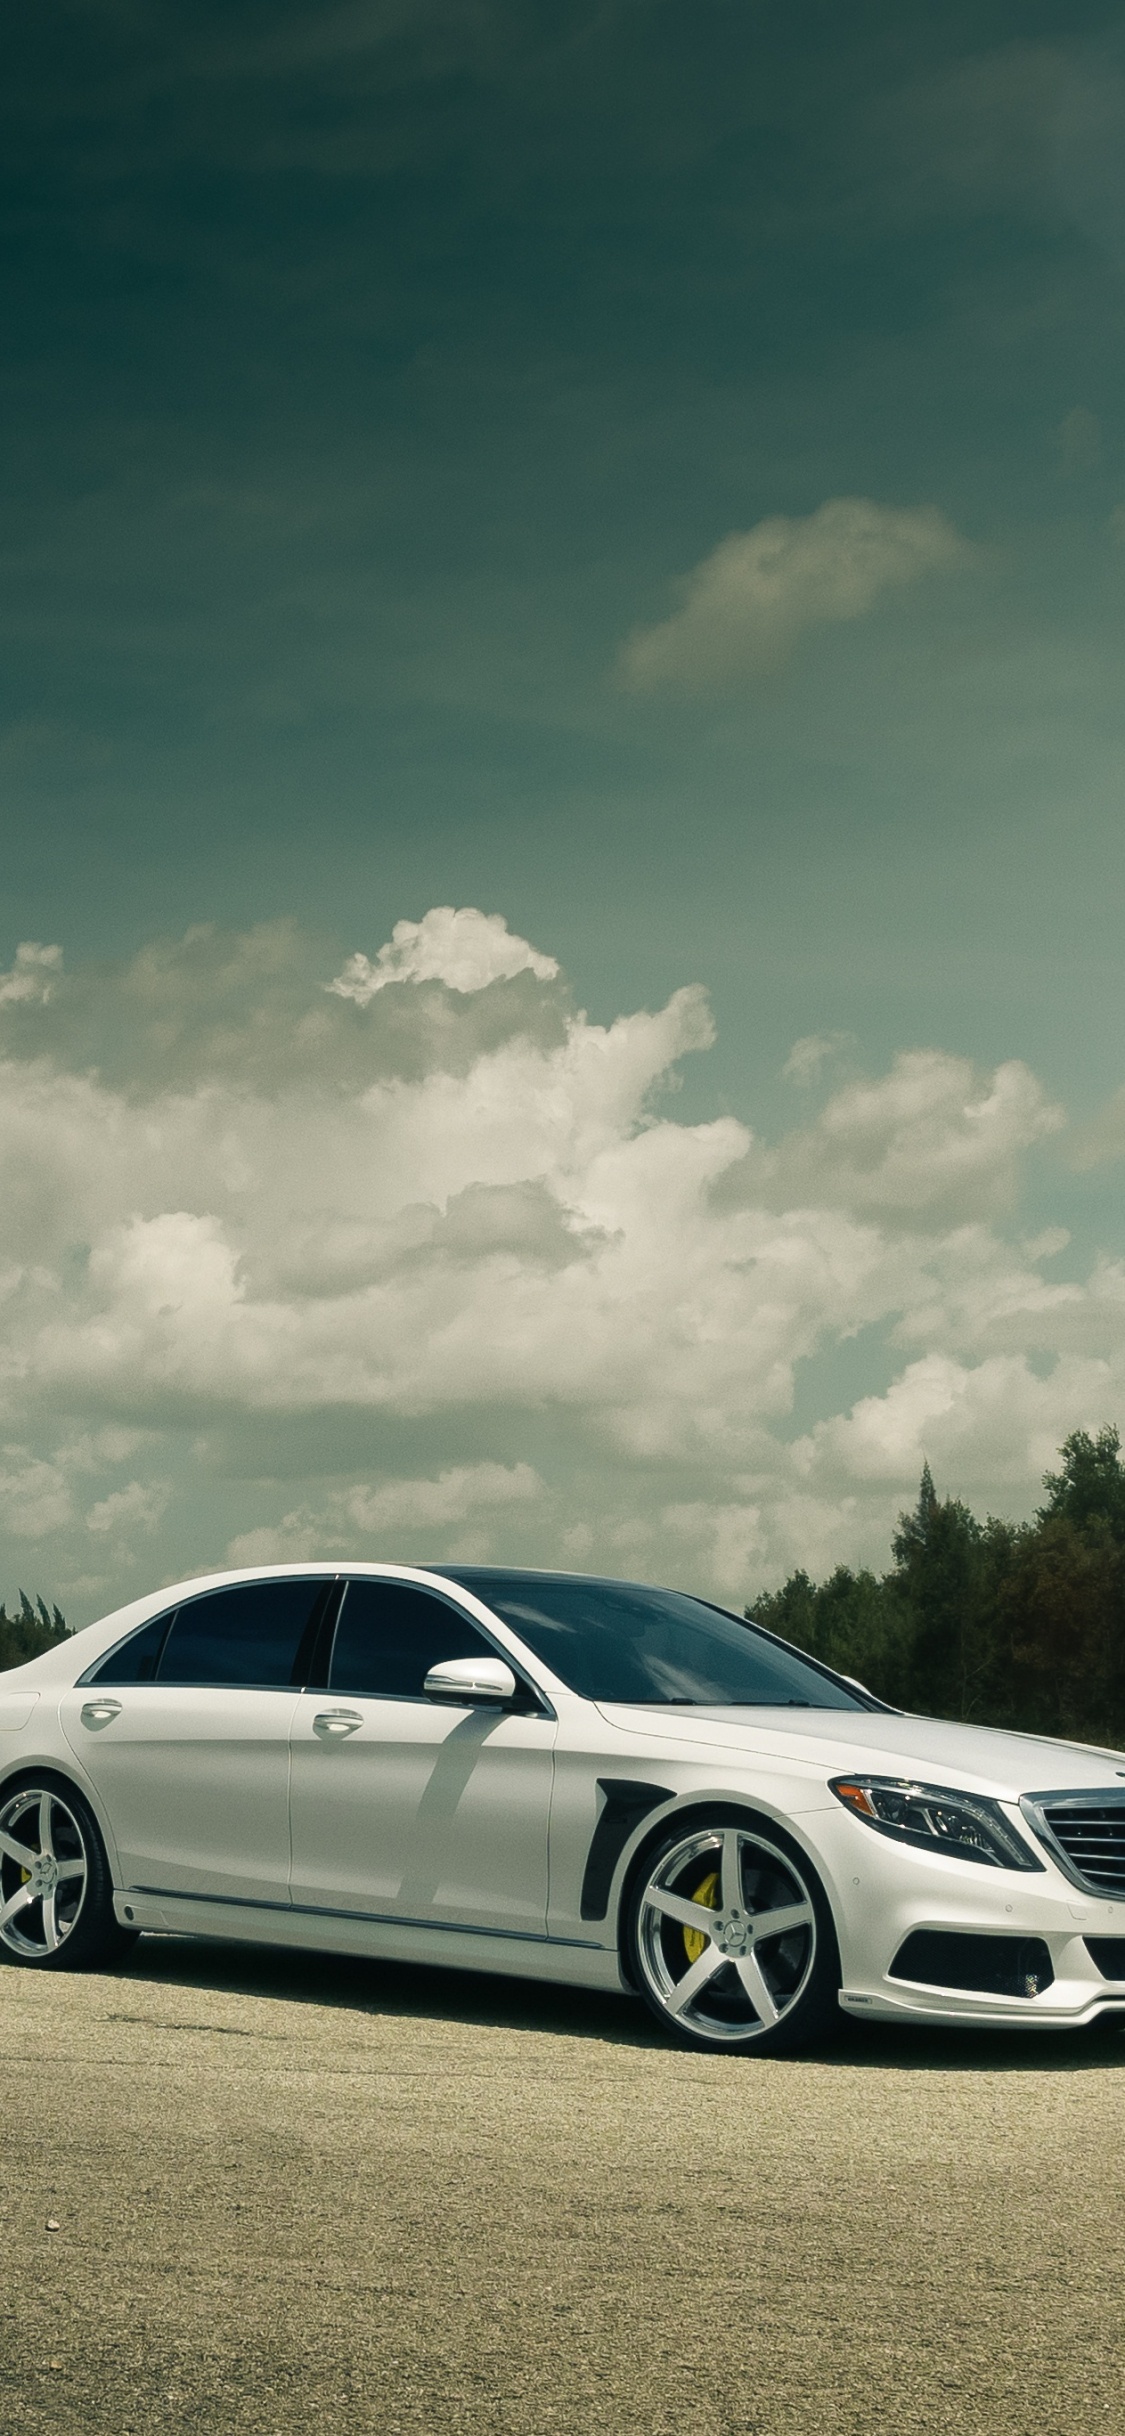 White Sedan on Gray Asphalt Road Under White Clouds and Blue Sky During Daytime. Wallpaper in 1125x2436 Resolution